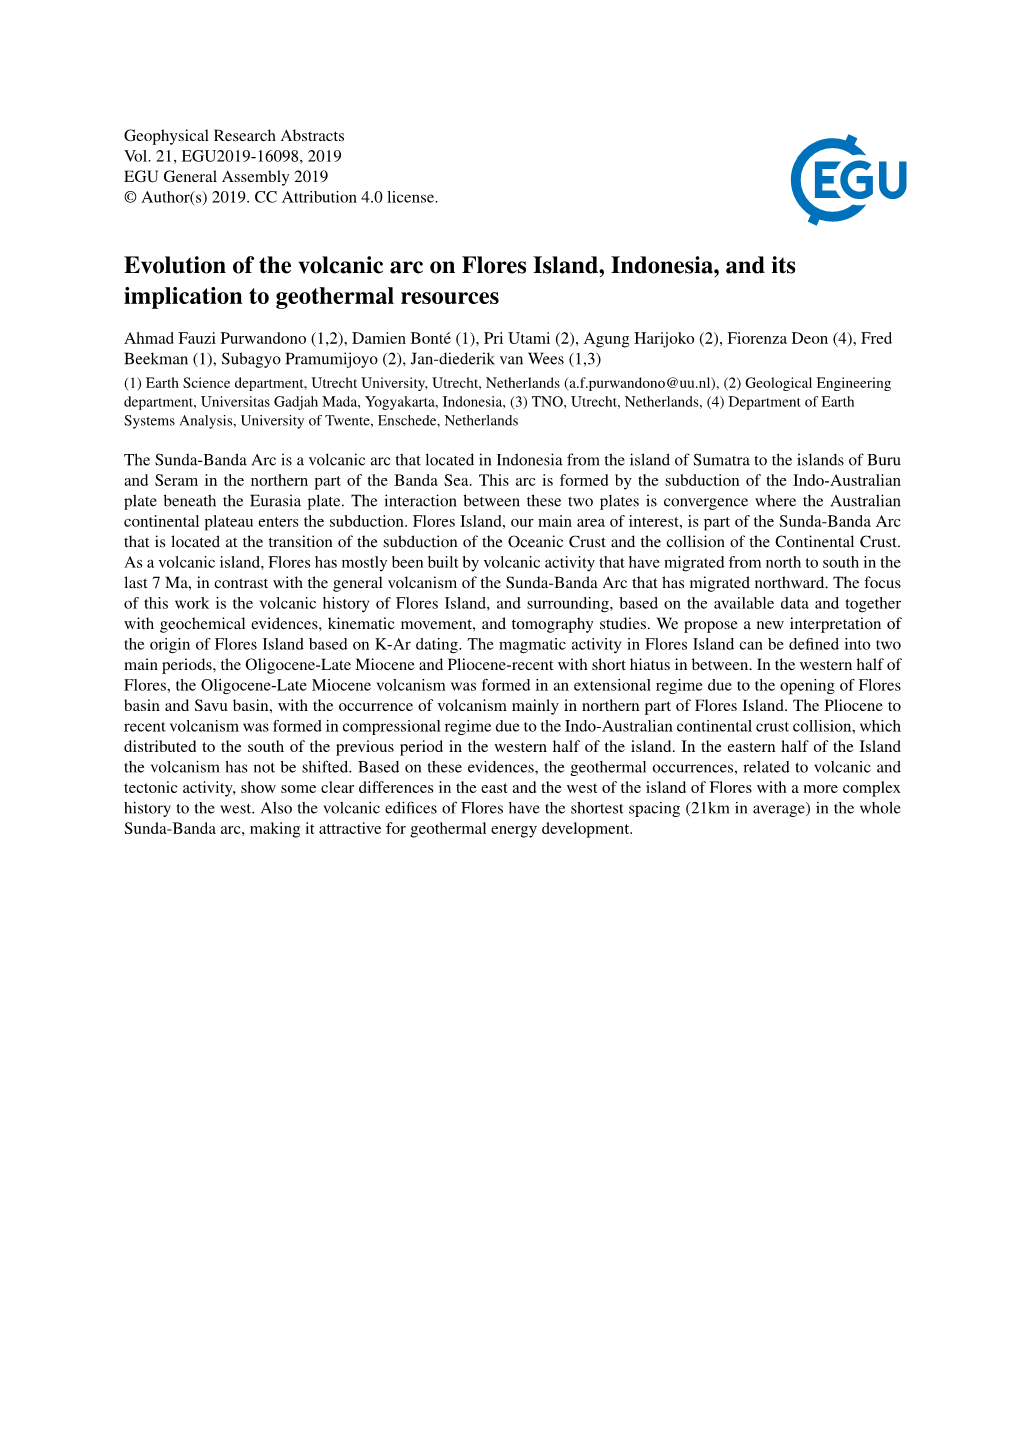 Evolution of the Volcanic Arc on Flores Island, Indonesia, and Its Implication to Geothermal Resources